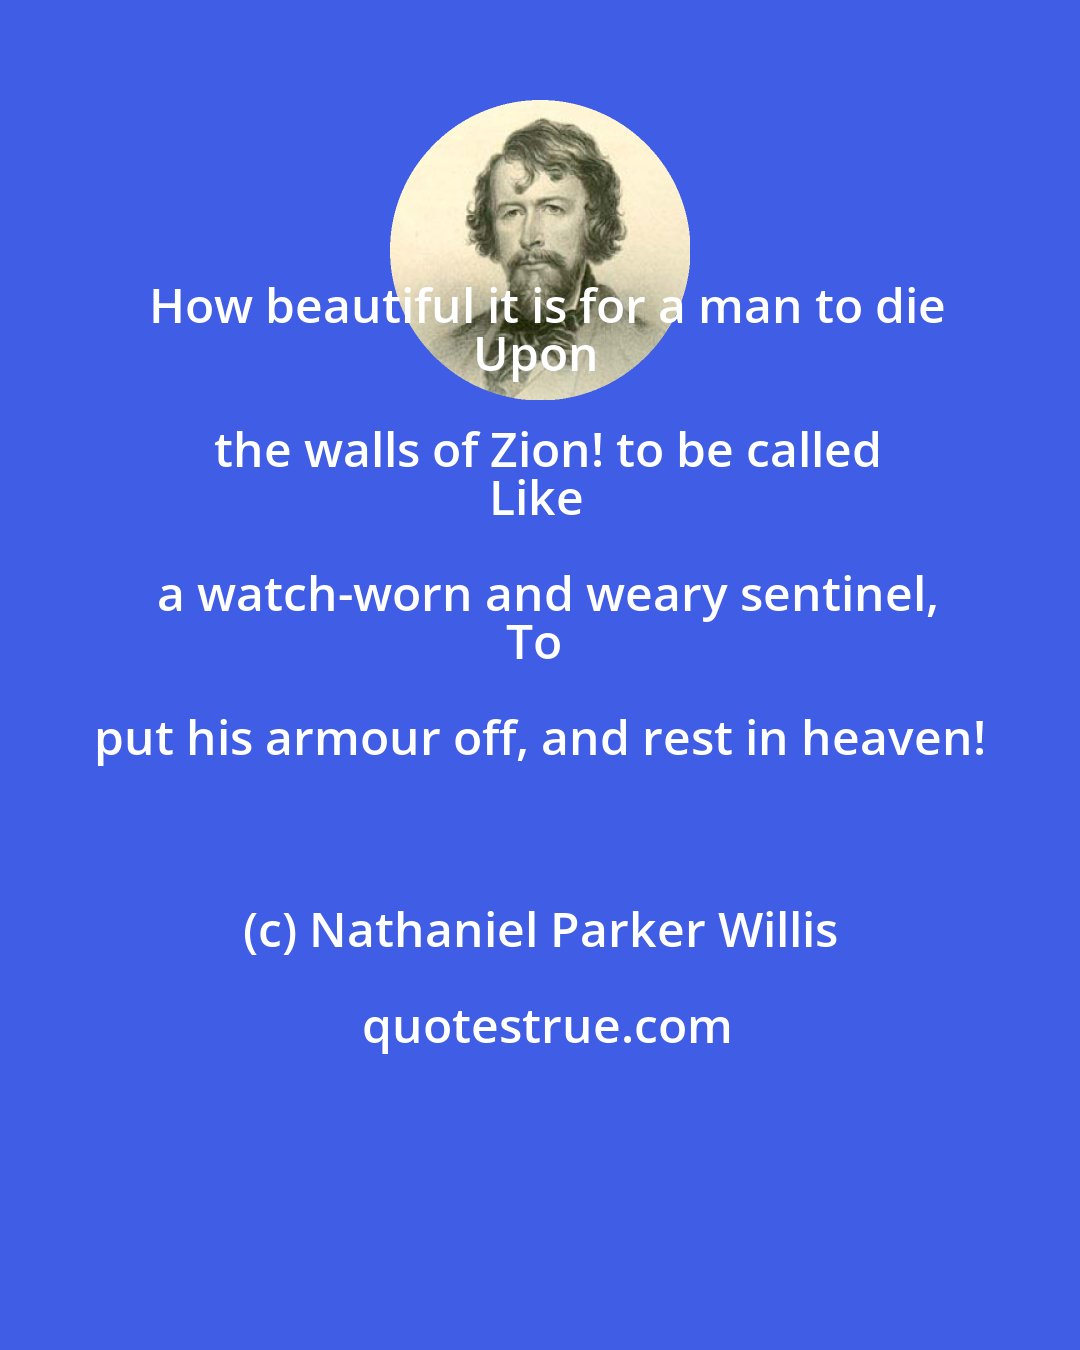 Nathaniel Parker Willis: How beautiful it is for a man to die
Upon the walls of Zion! to be called
Like a watch-worn and weary sentinel,
To put his armour off, and rest in heaven!